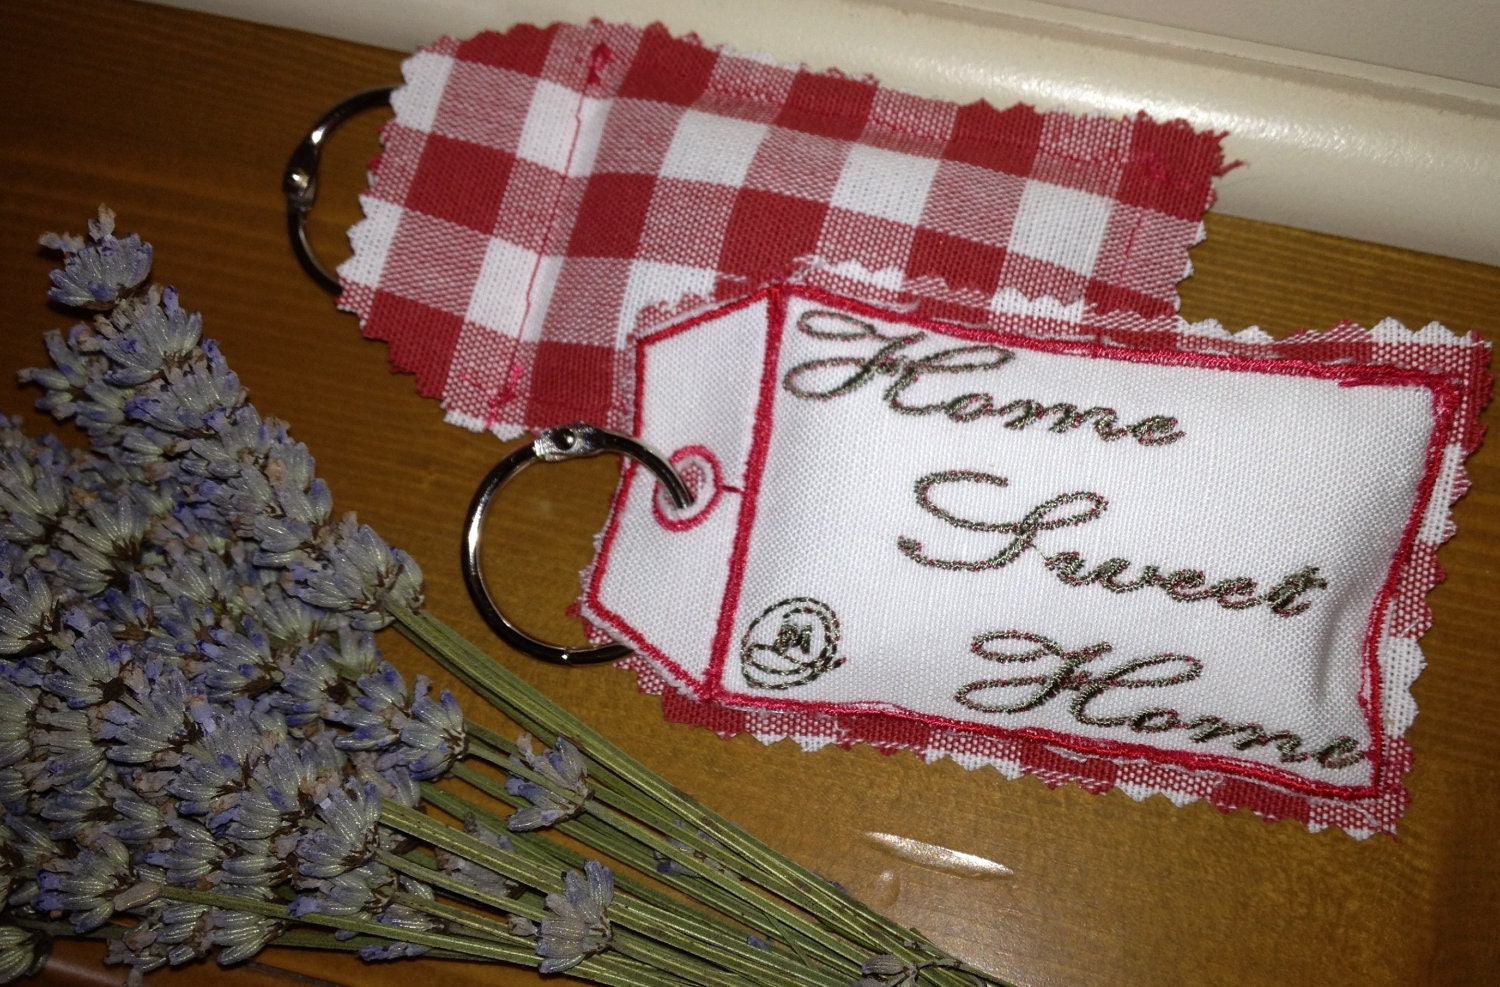 Home Sweet Home - homemade embroidery, Organic French Lavender